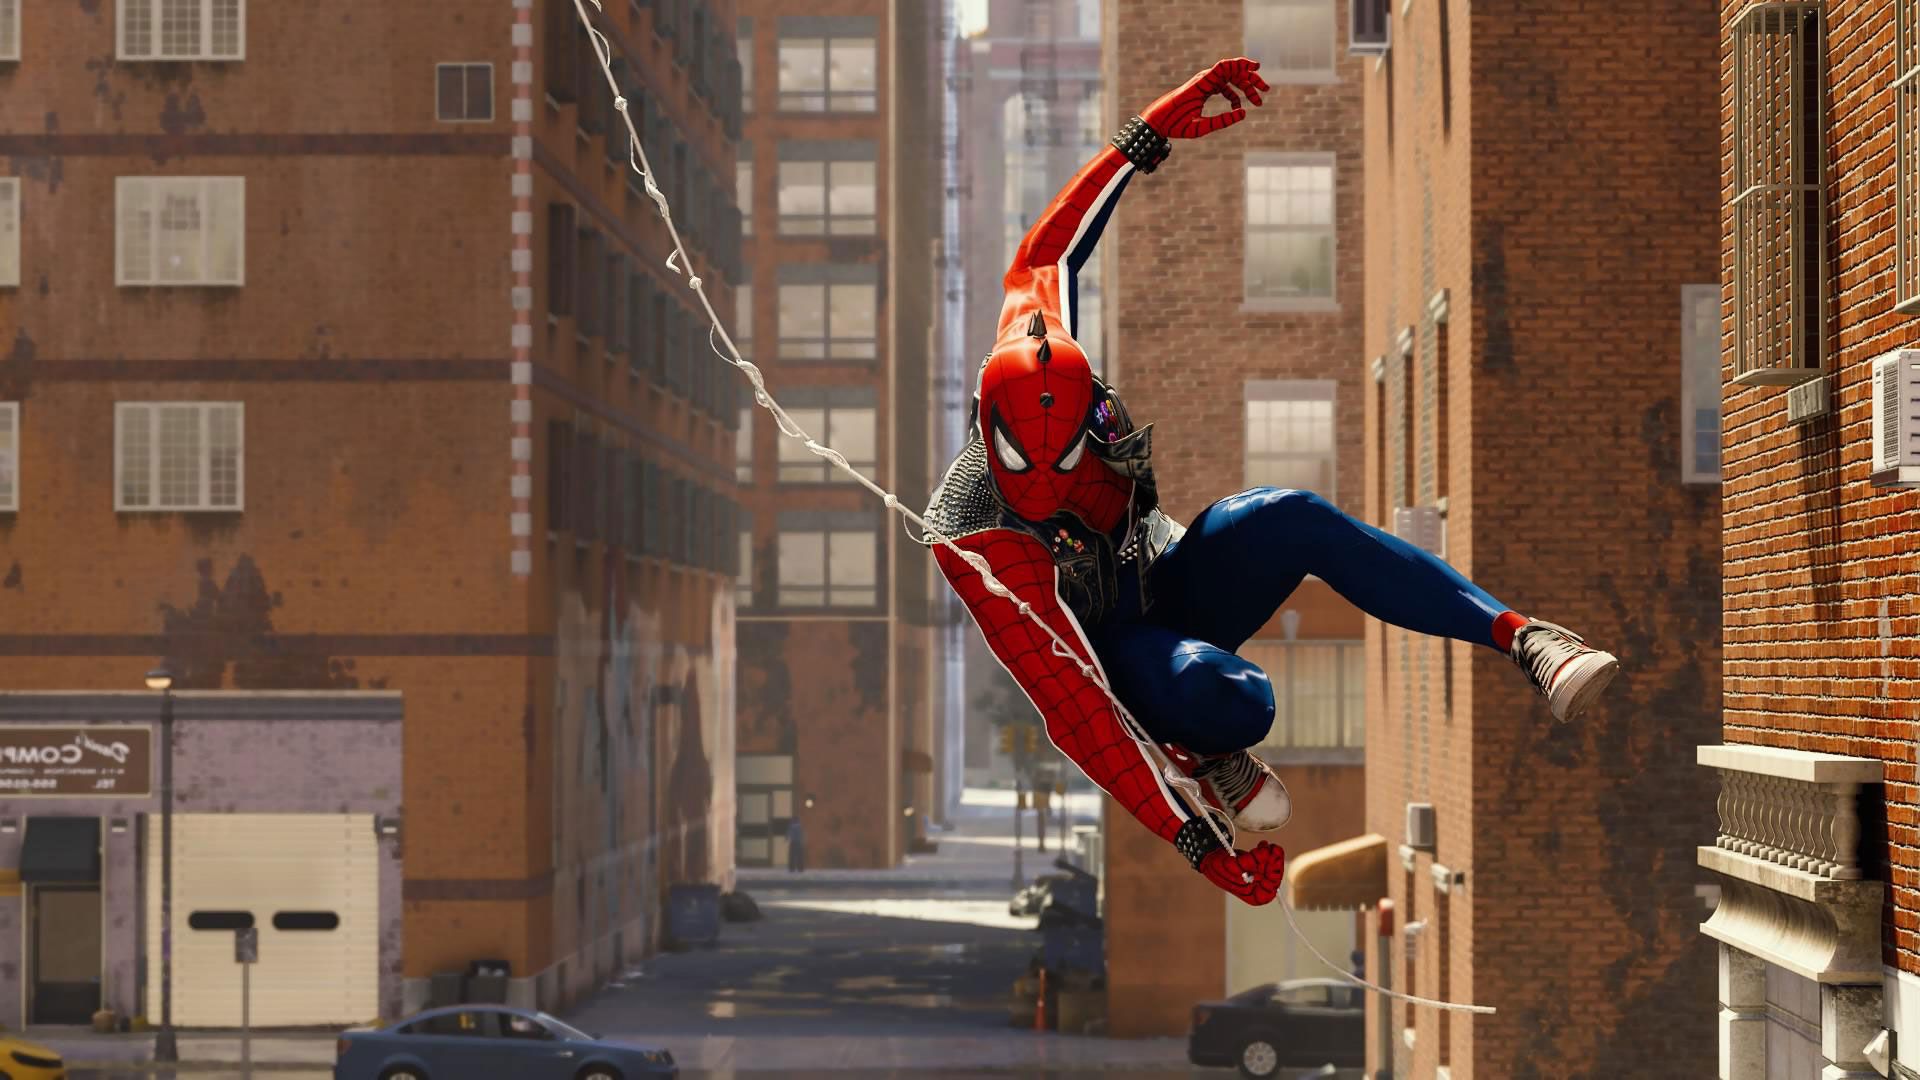 I Feel Like The Spider Punk Suit Is A Little Under Appreciated.: SpidermanPS4